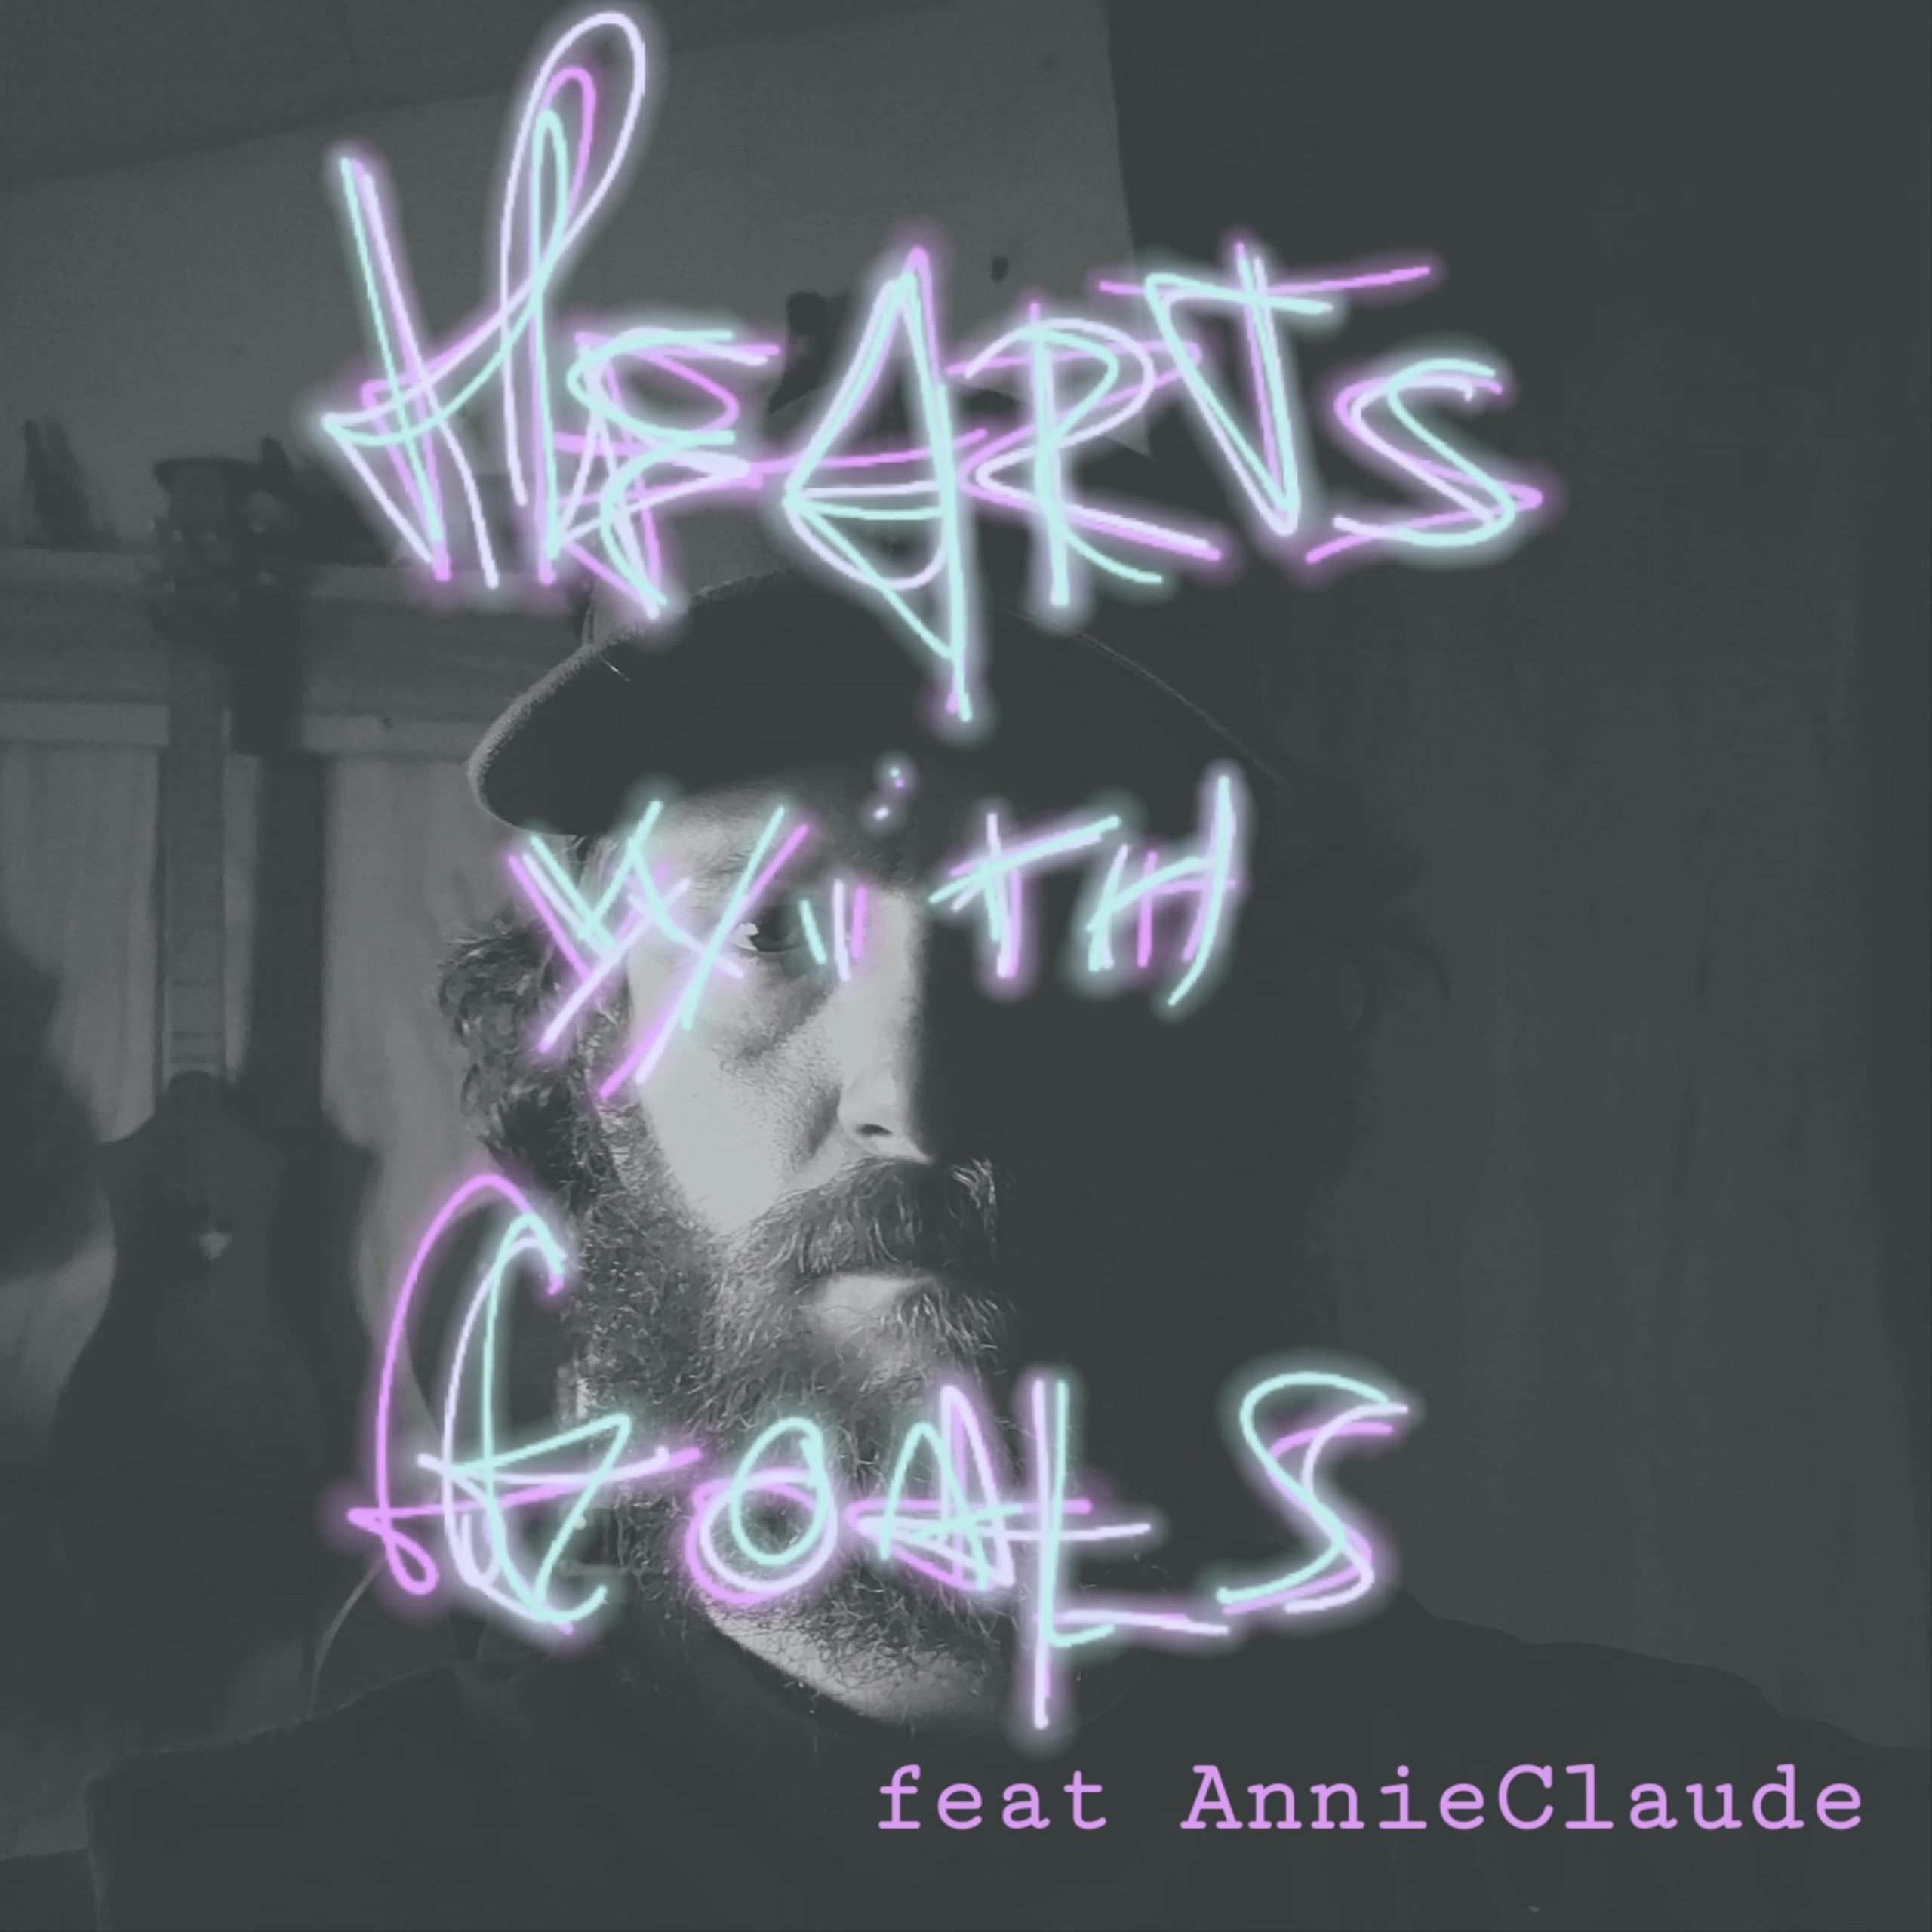 Hearts with Goals